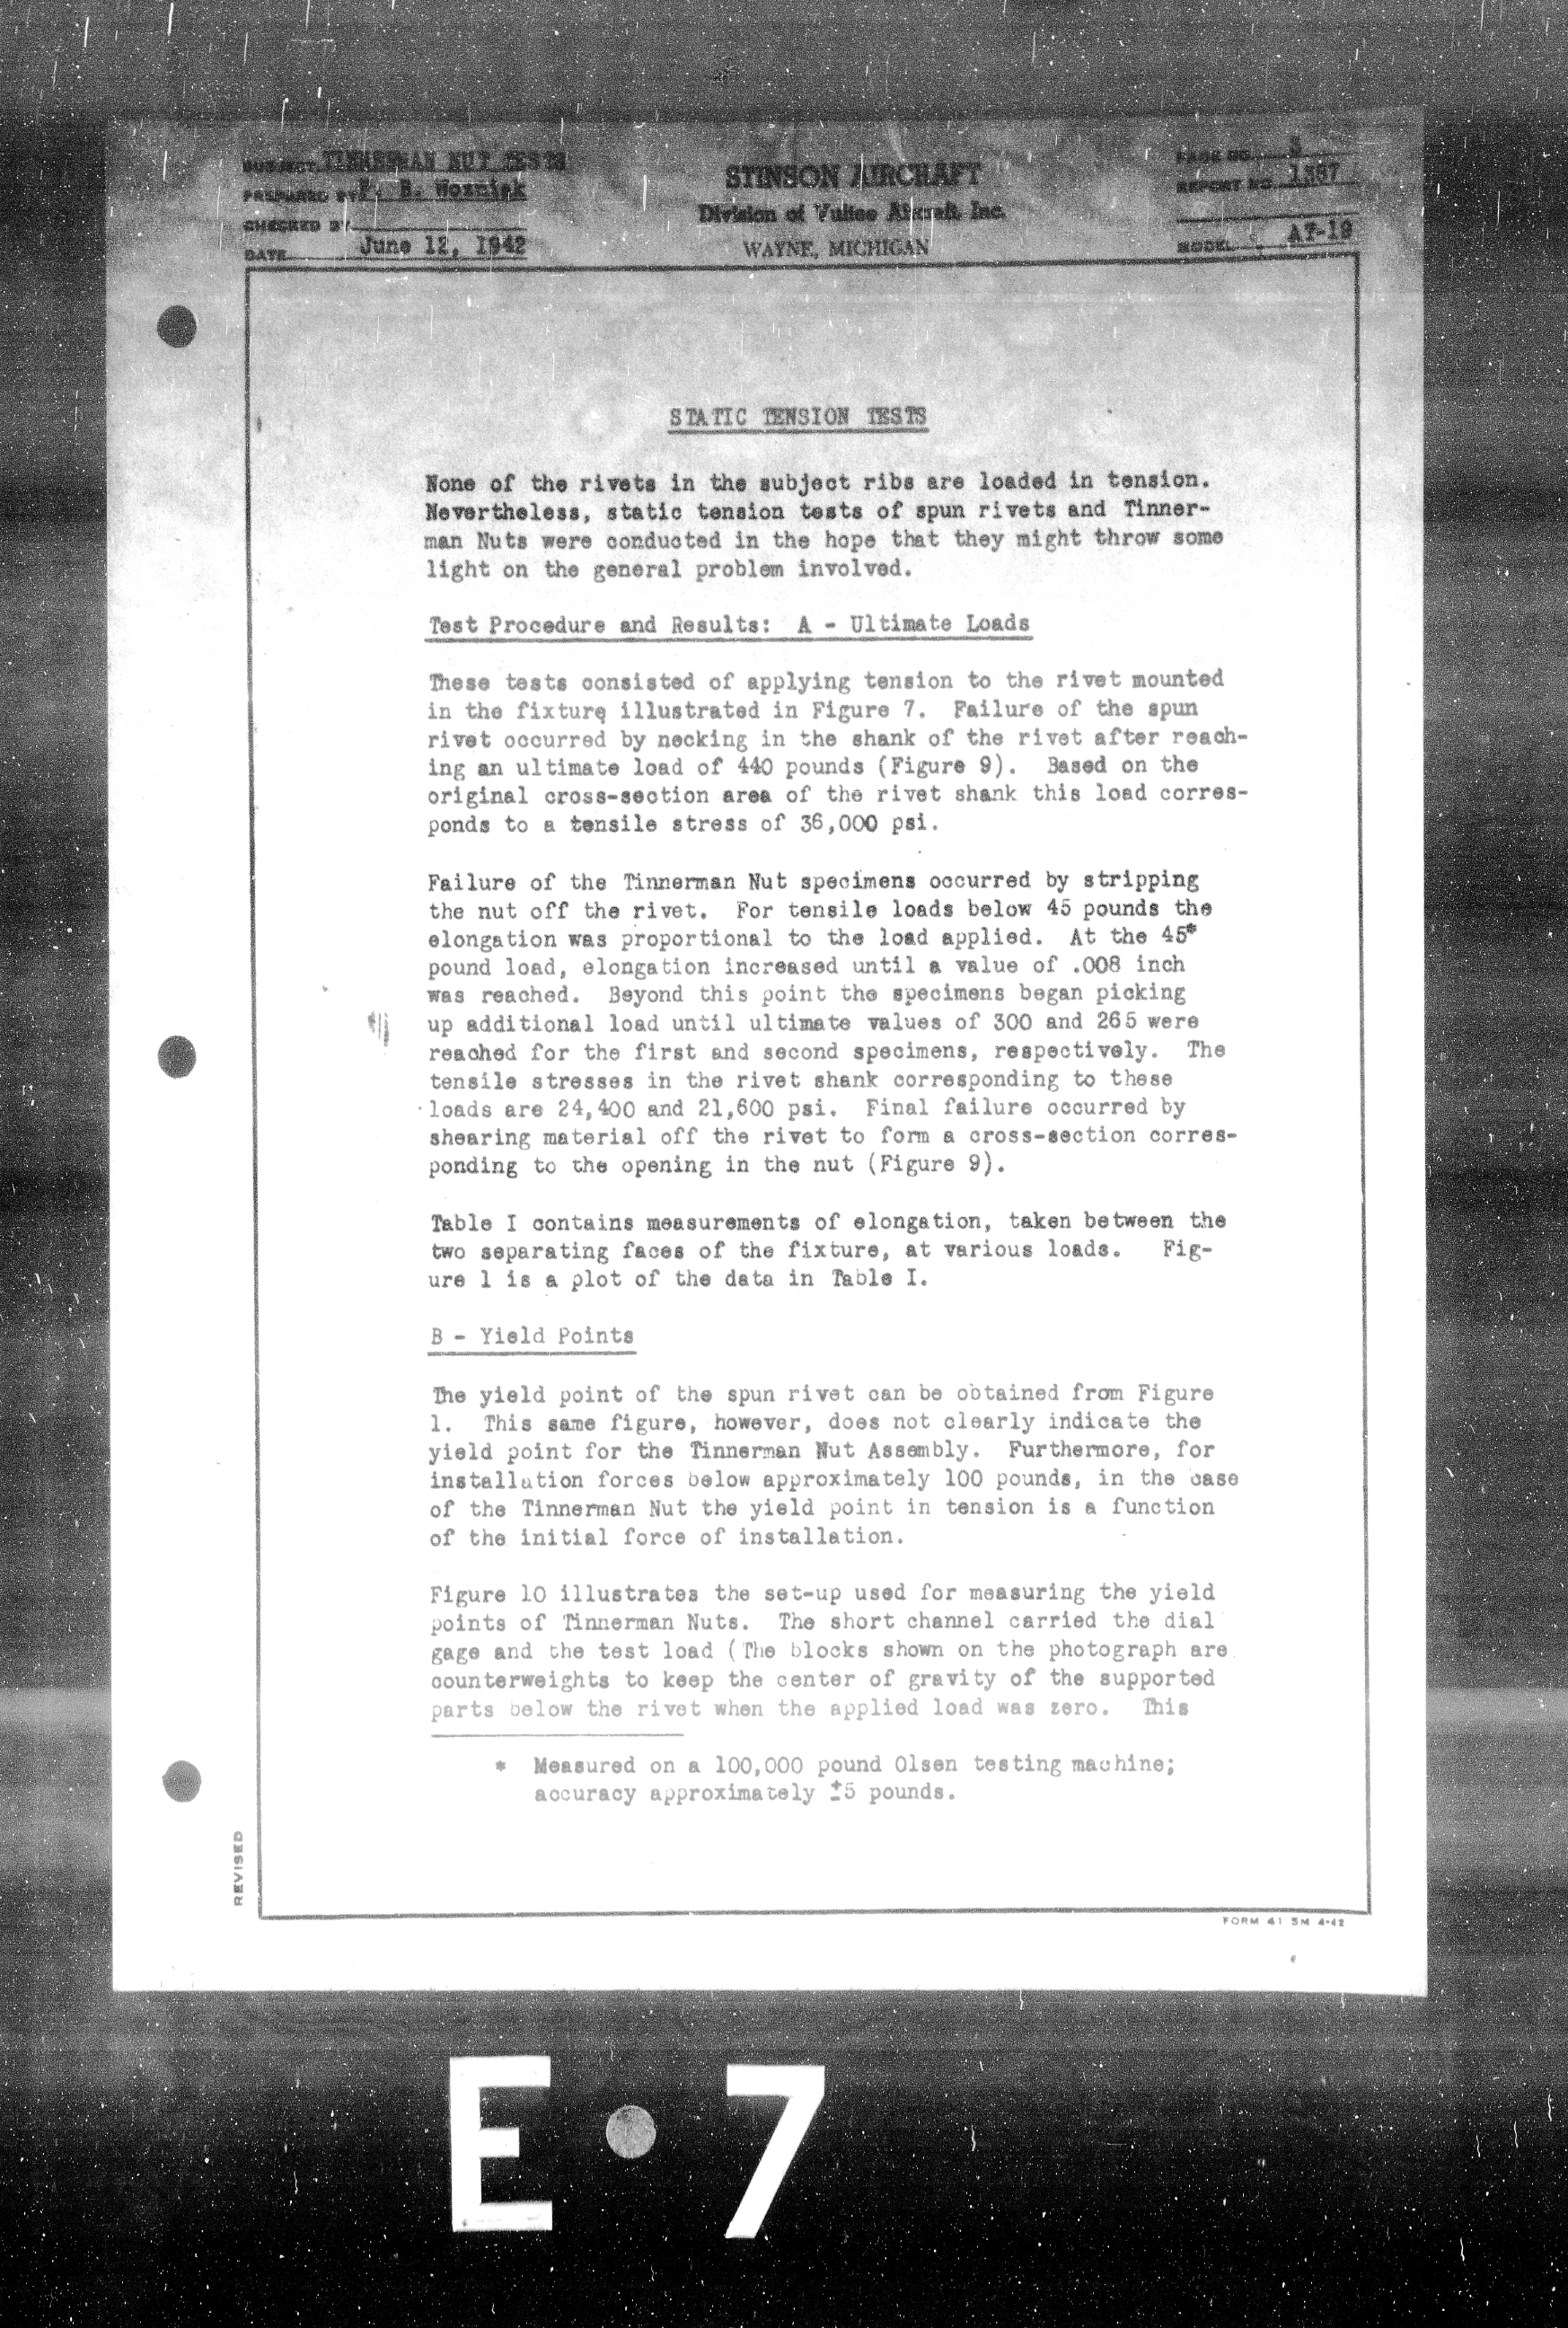 Sample page 5 from AirCorps Library document: Static and Vibration Tests of Tinnerman Speed Nuts